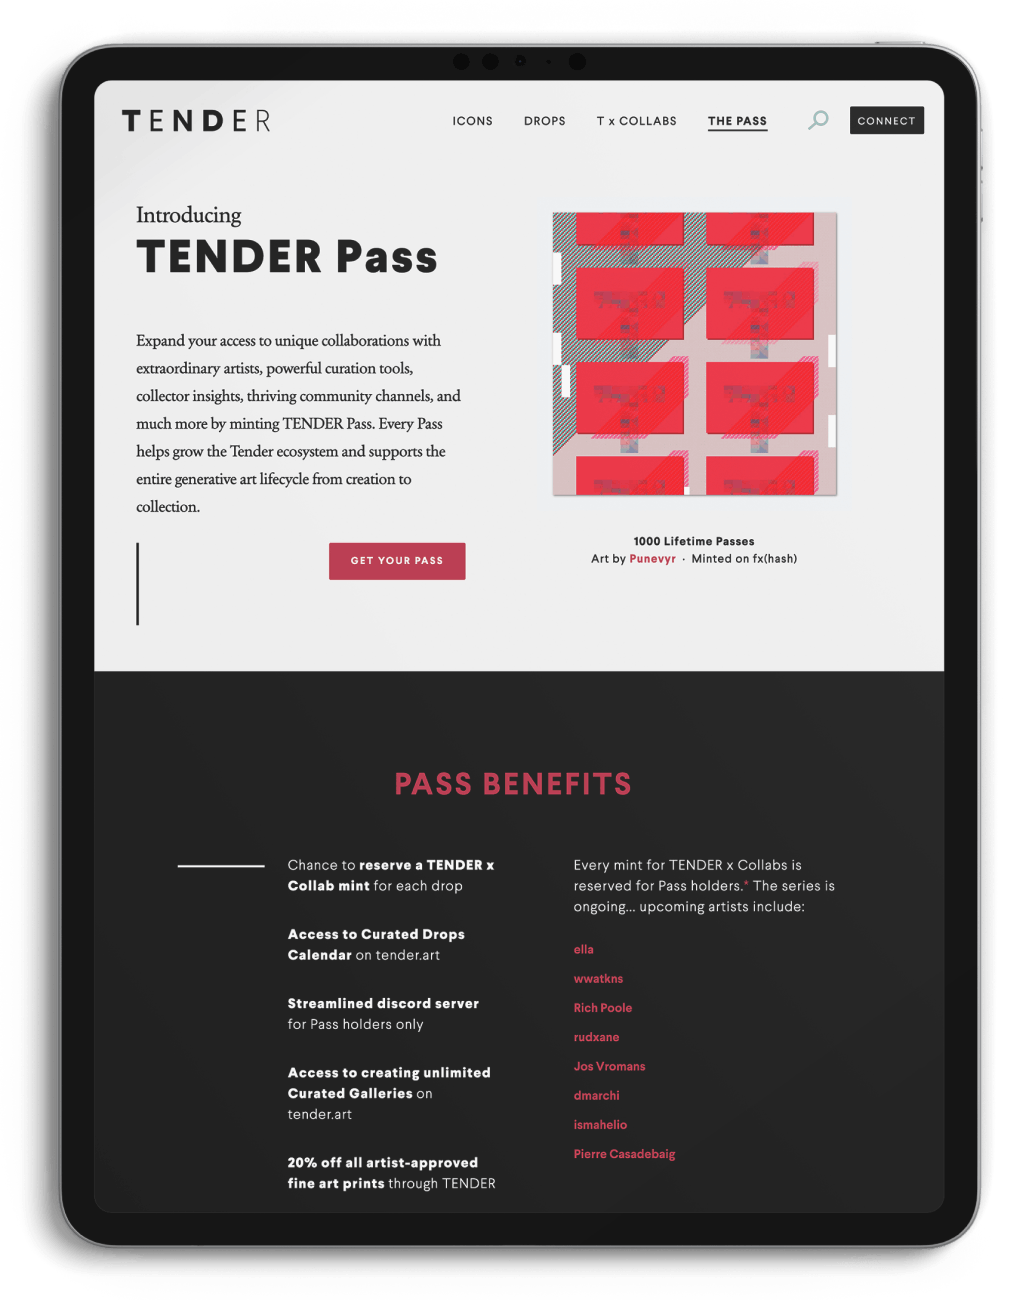 The TENDER Pass for generative art lovers.